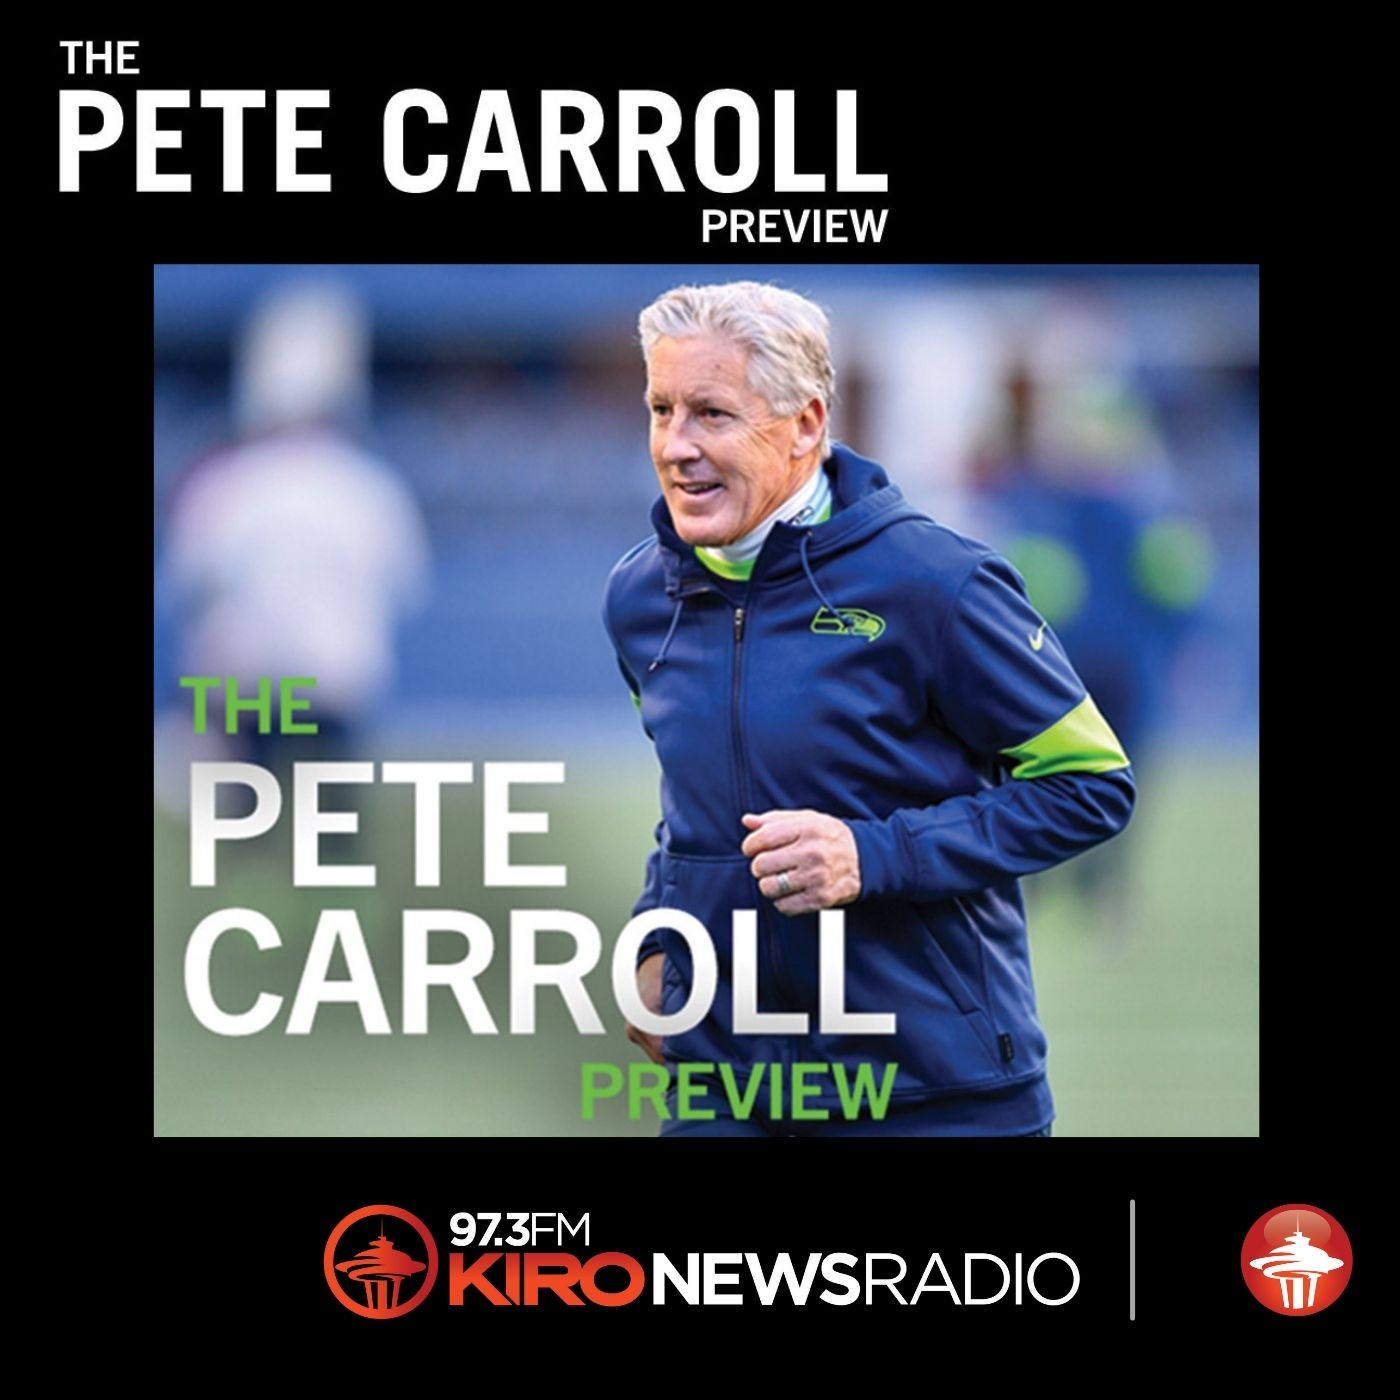 Pete Carroll Preview: How OL looks ahead of game in Detroit